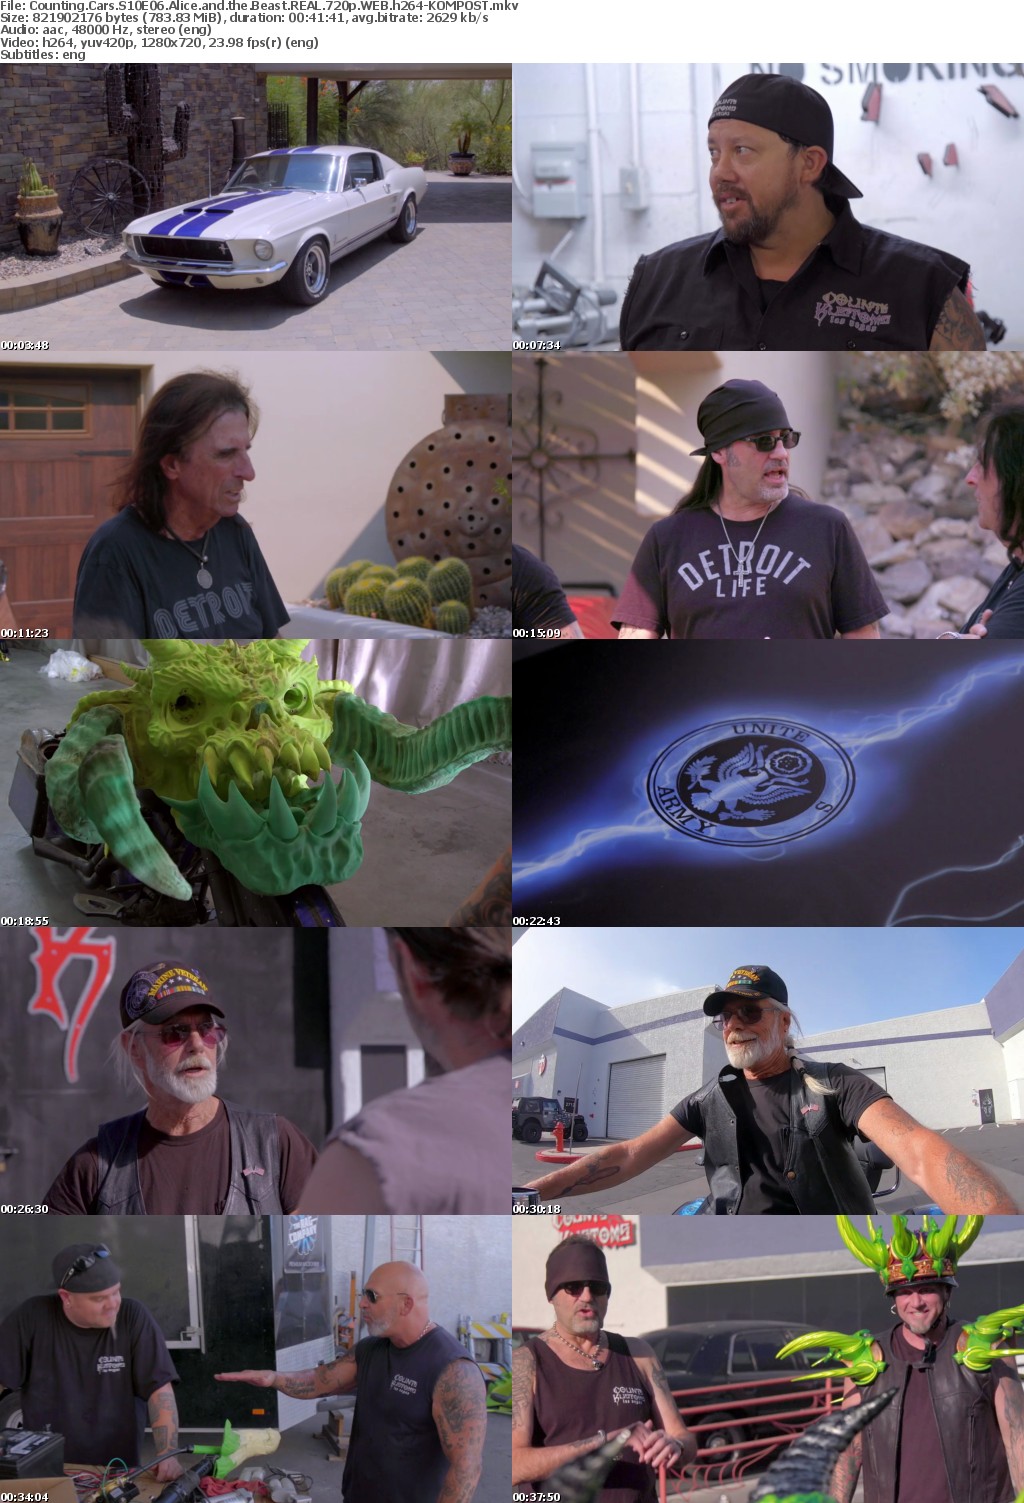 Counting Cars S10E06 Alice and the Beast REAL 720p WEB h264-KOMPOST